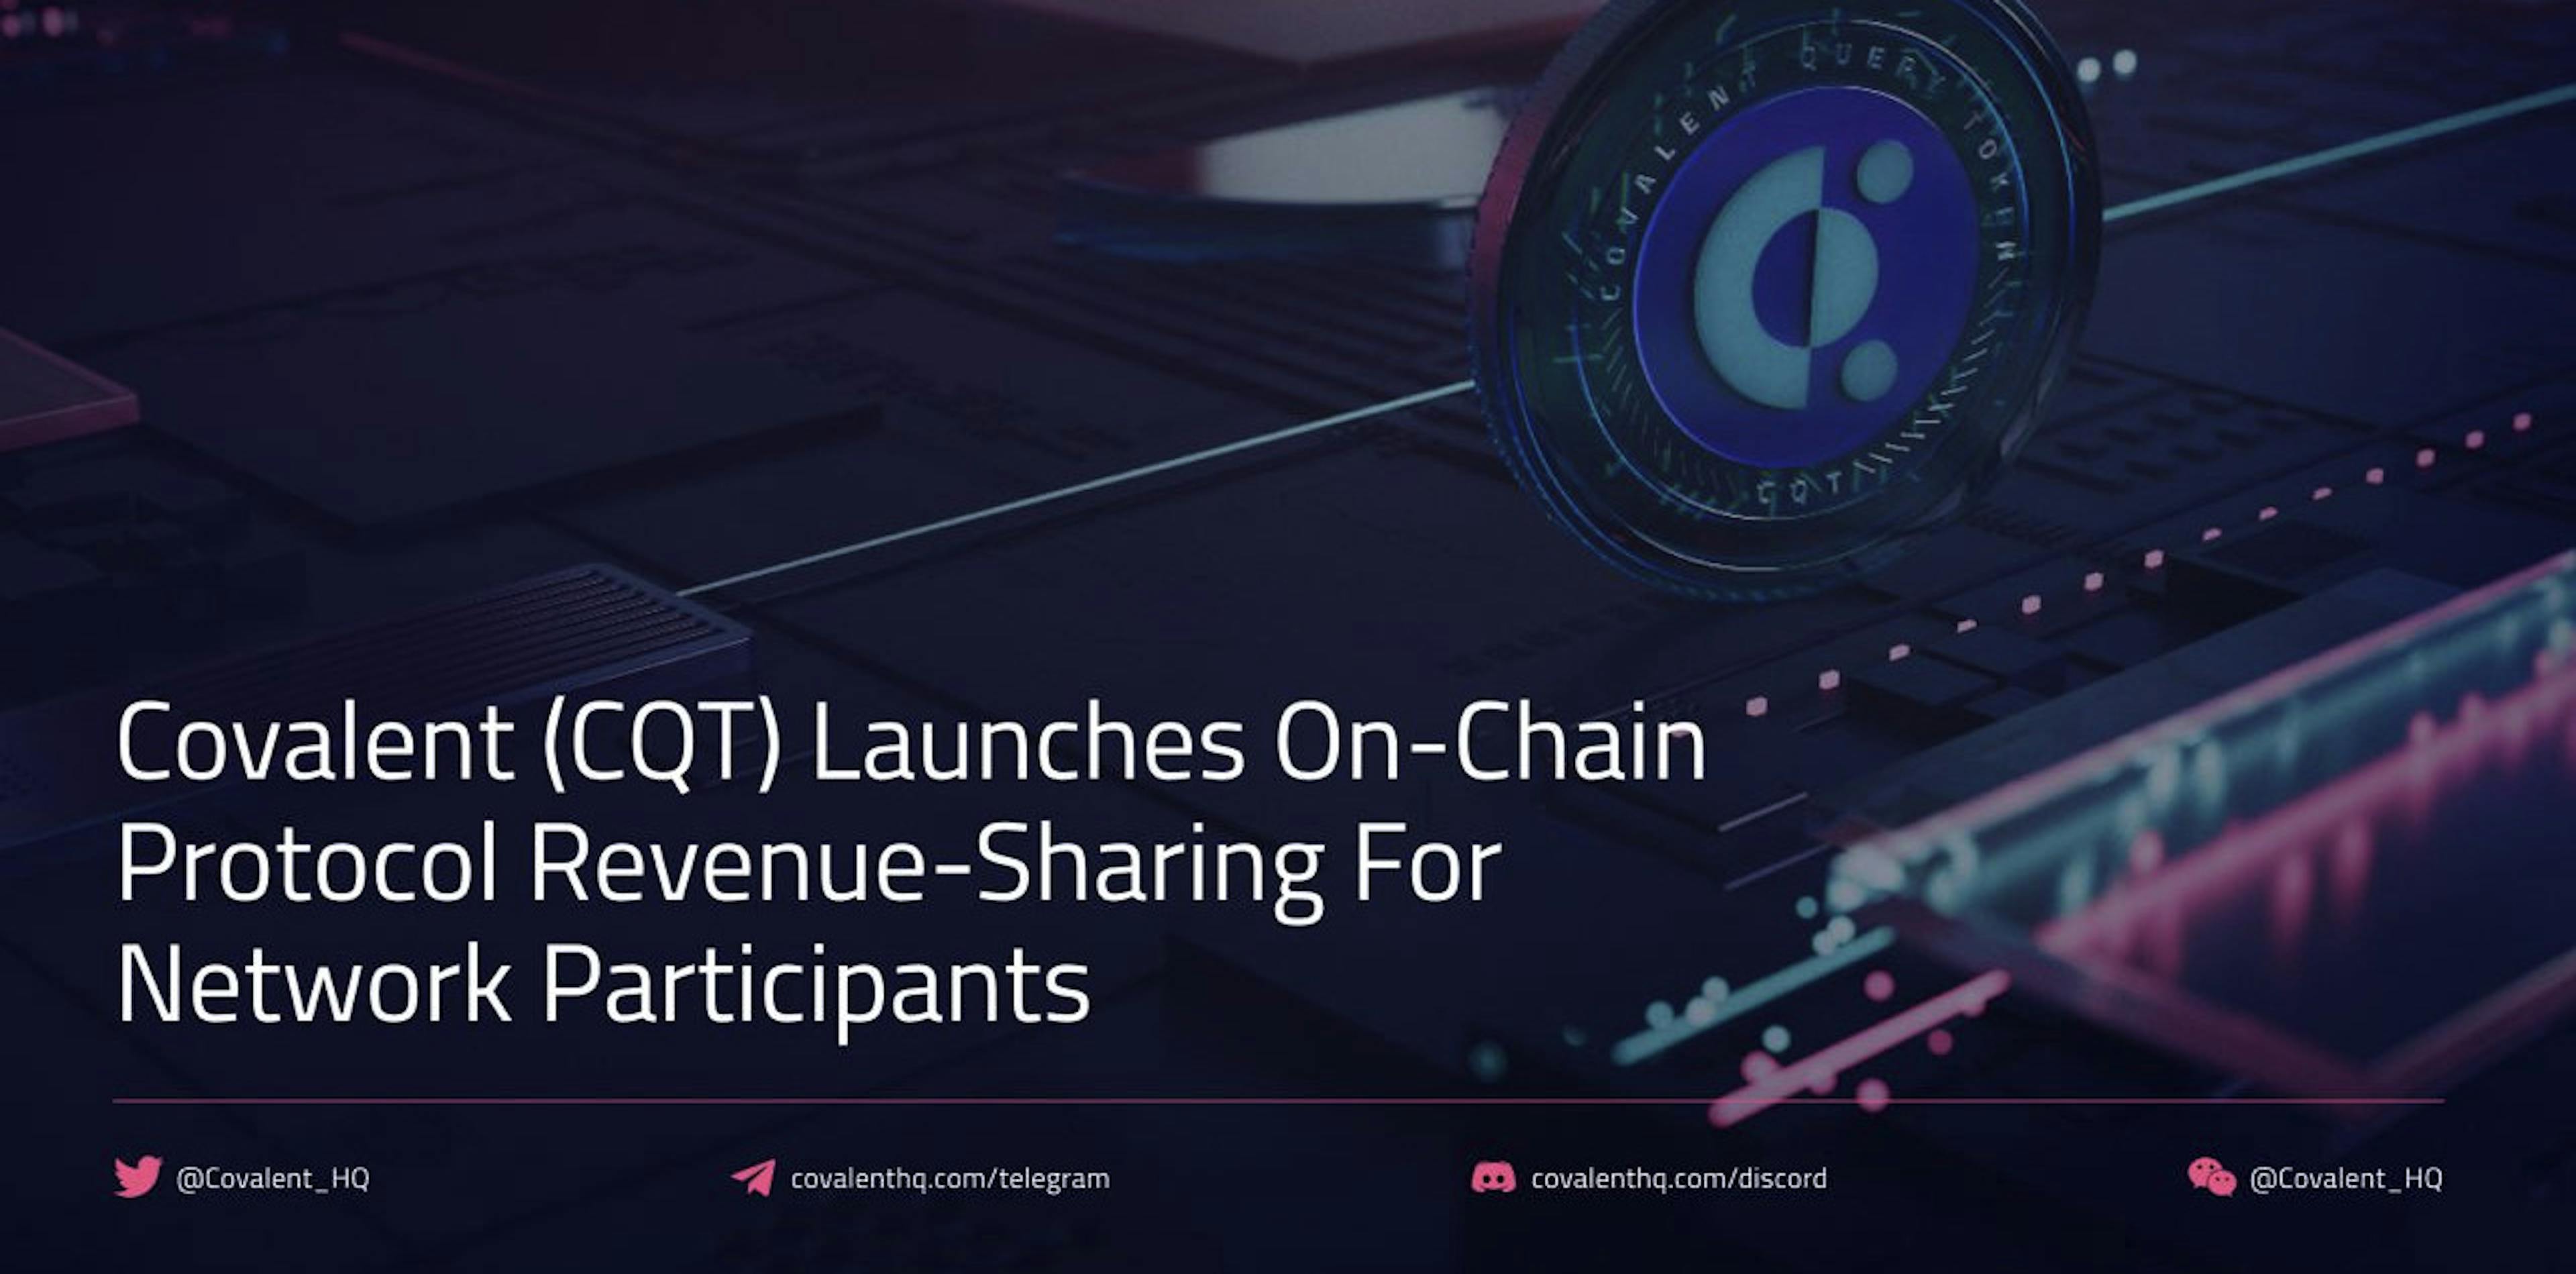 featured image - Covalent (CQT) Launches On-Chain Protocol Revenue-Sharing For Network Participants